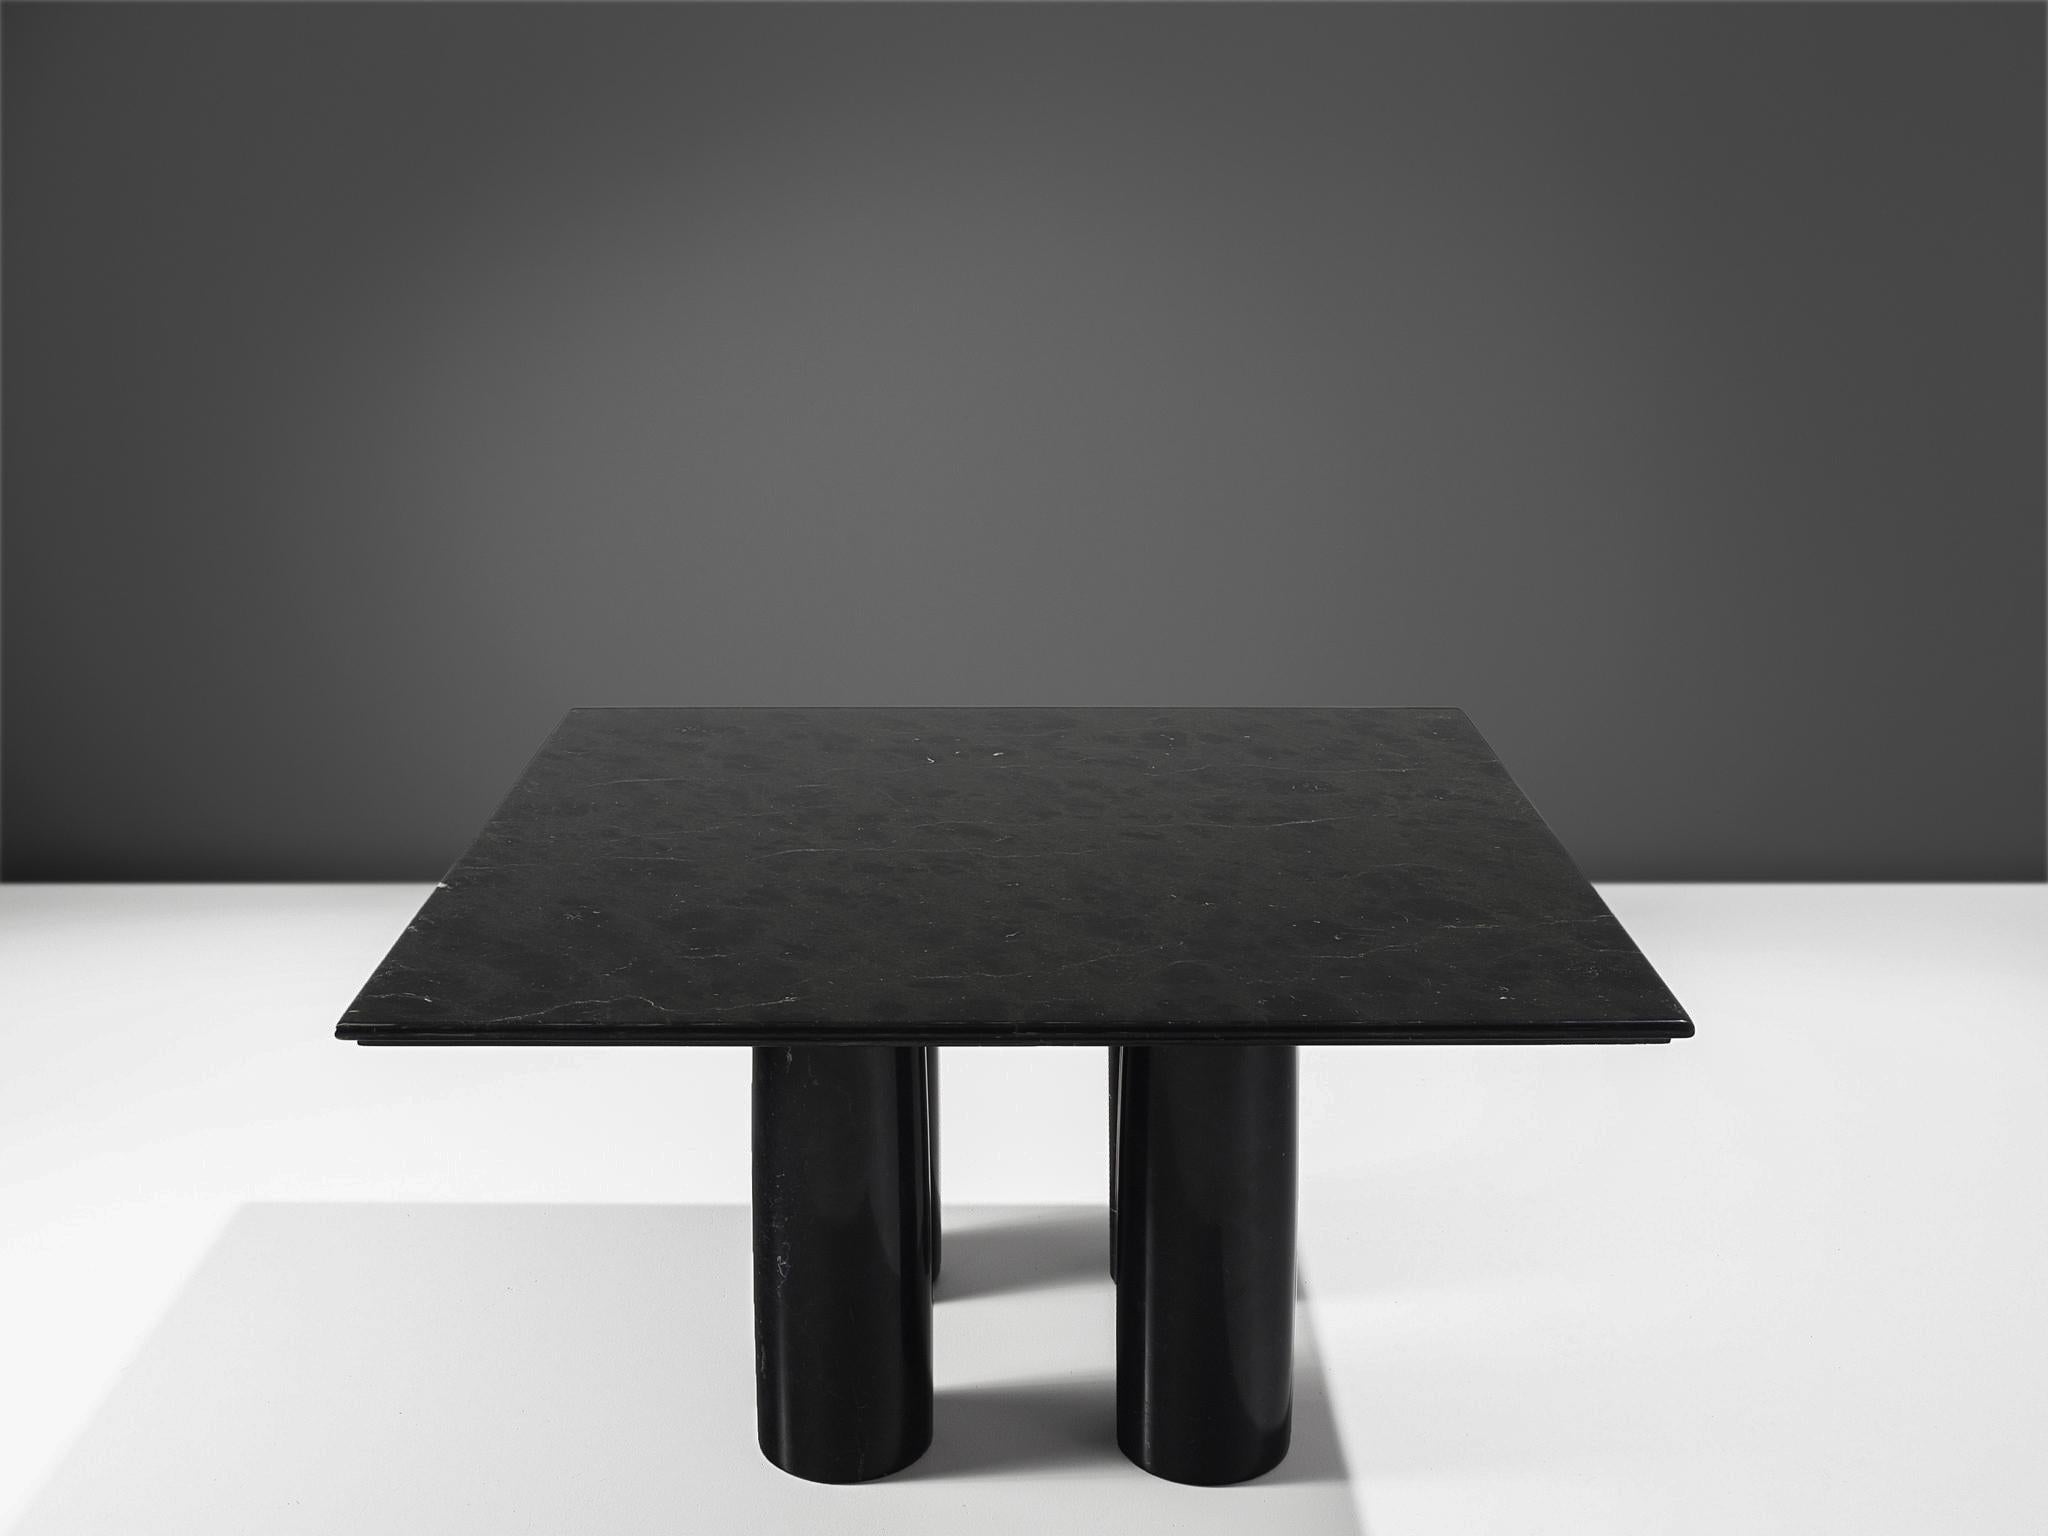 Mario Bellini for Cassina, dining table 'Il Colonnato', black marble, Italy, 1977

This 'Il Colonnato' dining table was designed by Italian designer Mario Bellini. For this series of tables, Bellini was inspired by ancient Roman columns. This center